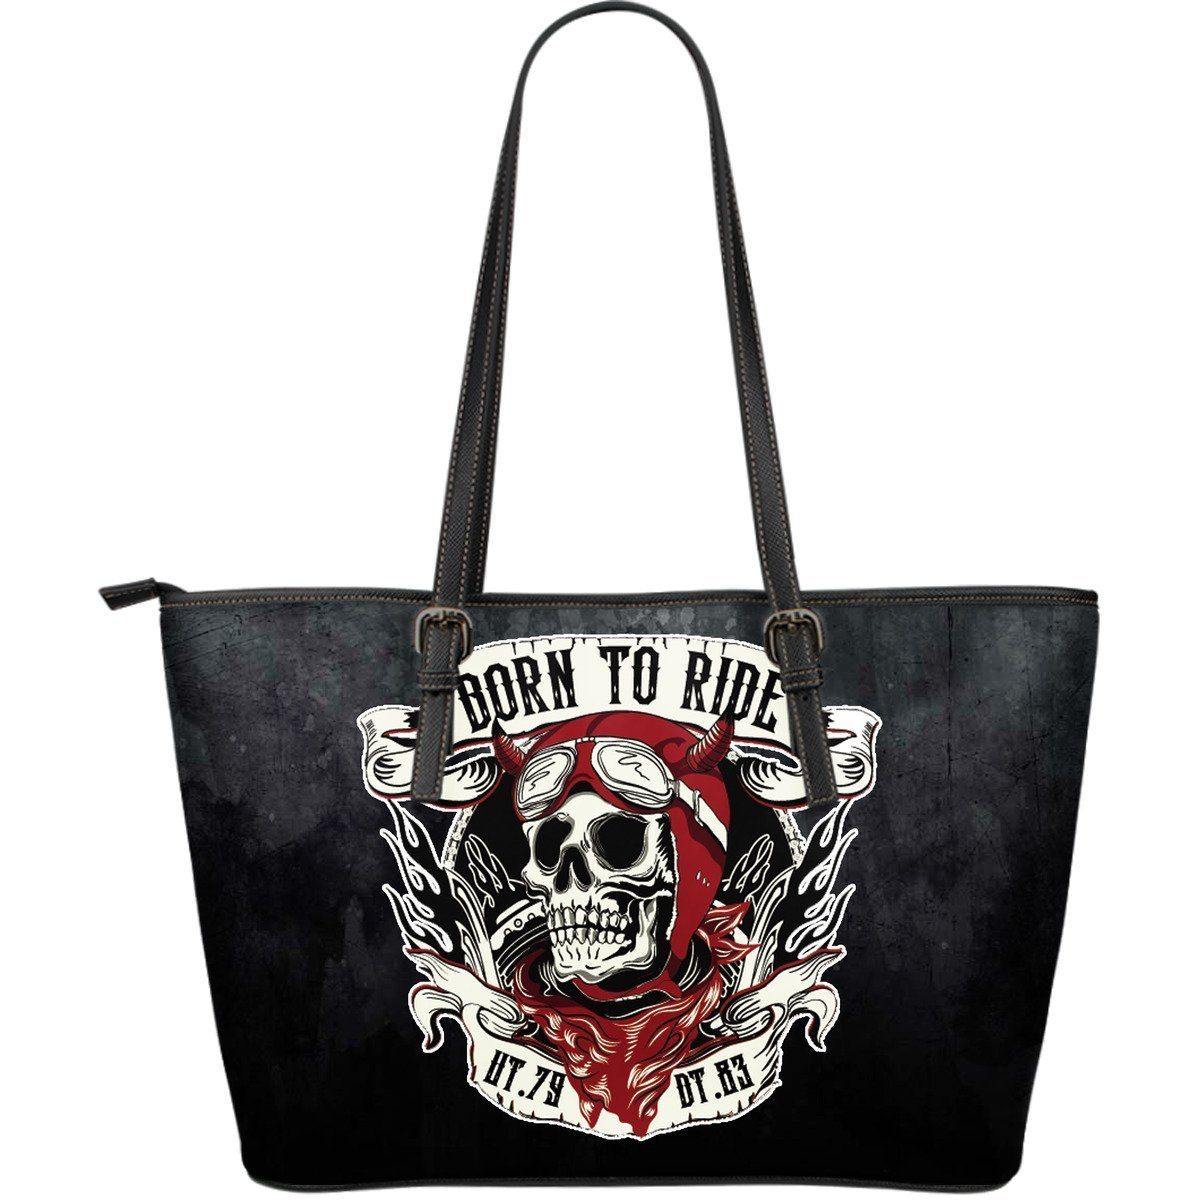 Born to Ride Large Tote Bag - American Legend Rider